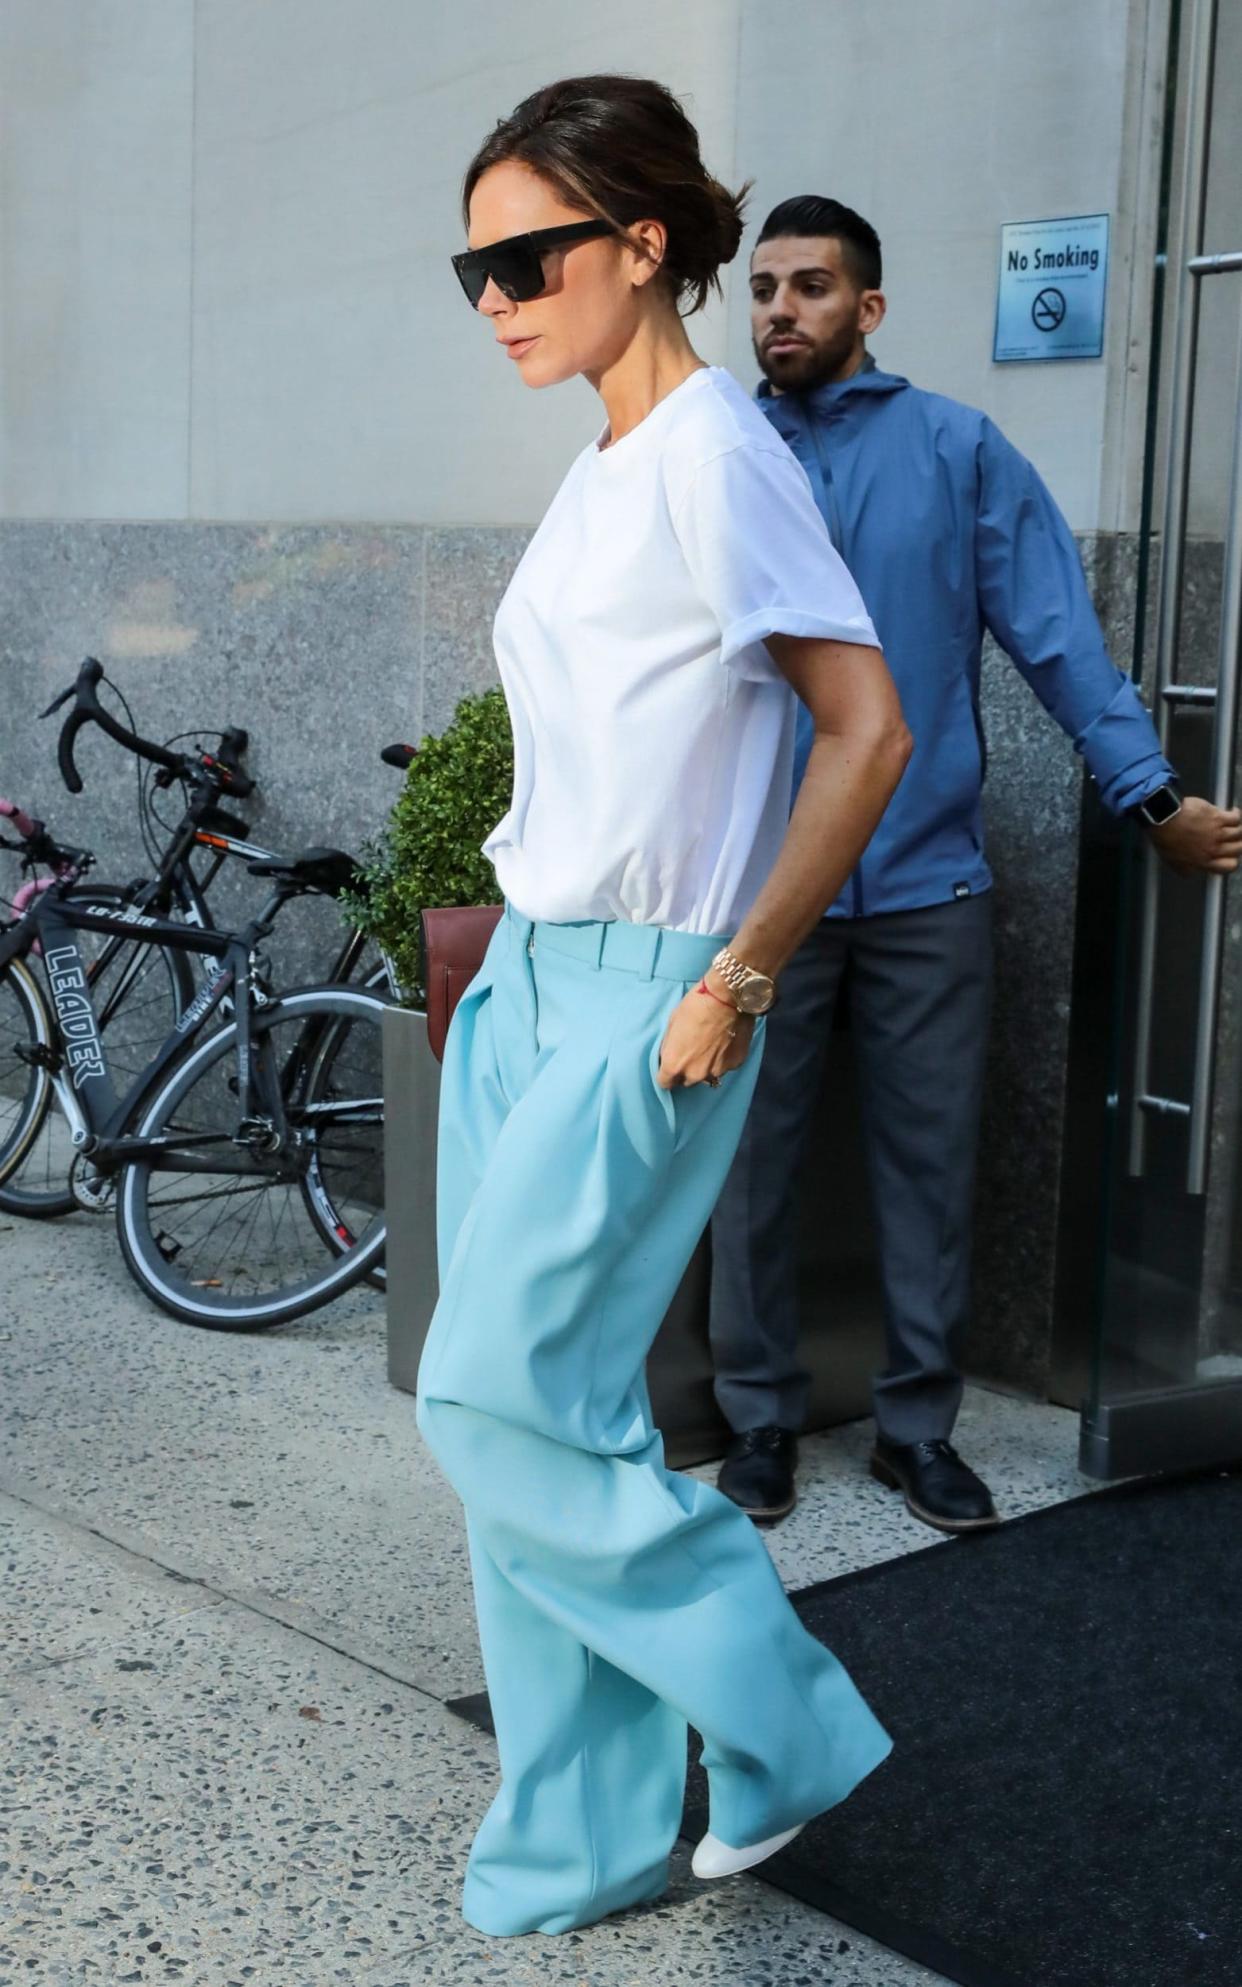 Victoria Beckham wearing a look from her new Victoria, Victoria Beckham during New York fashion week - GC Images